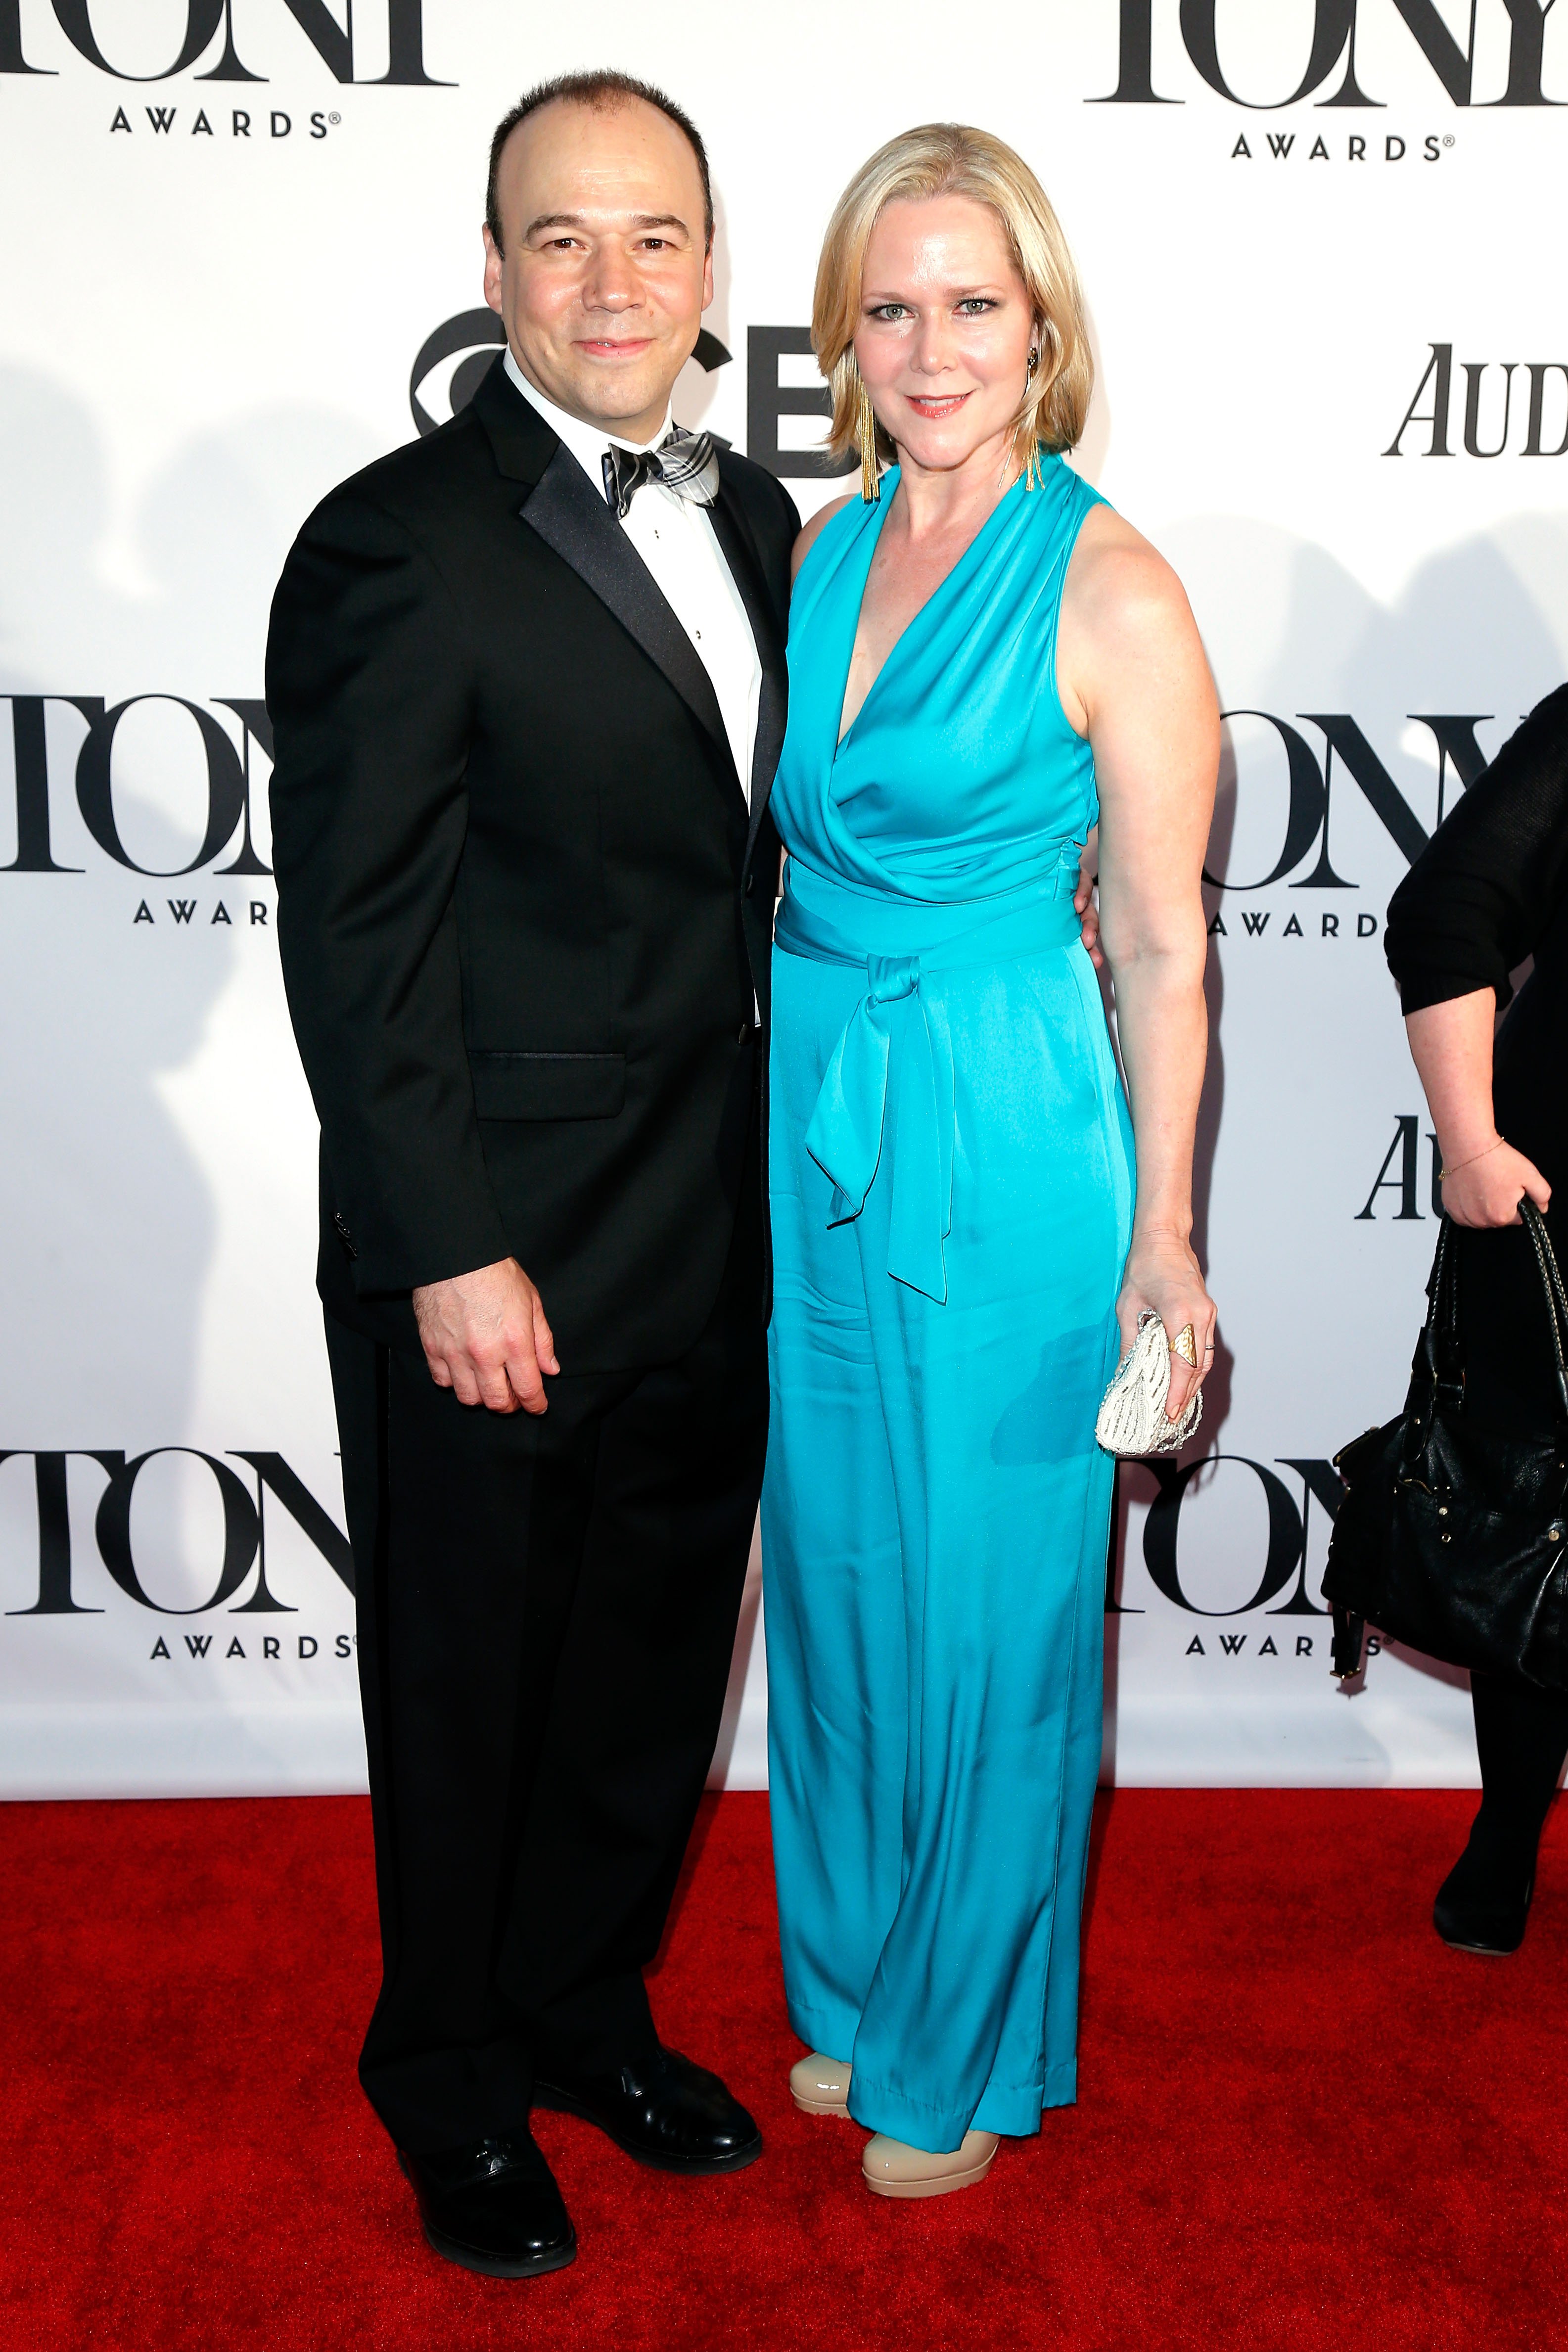 Actors Danny Burstein and Rebecca Luker attend The 67th Annual Tony Awards at Radio City Music Hall on June 9, 2013 in New York City. | Source: Getty Images